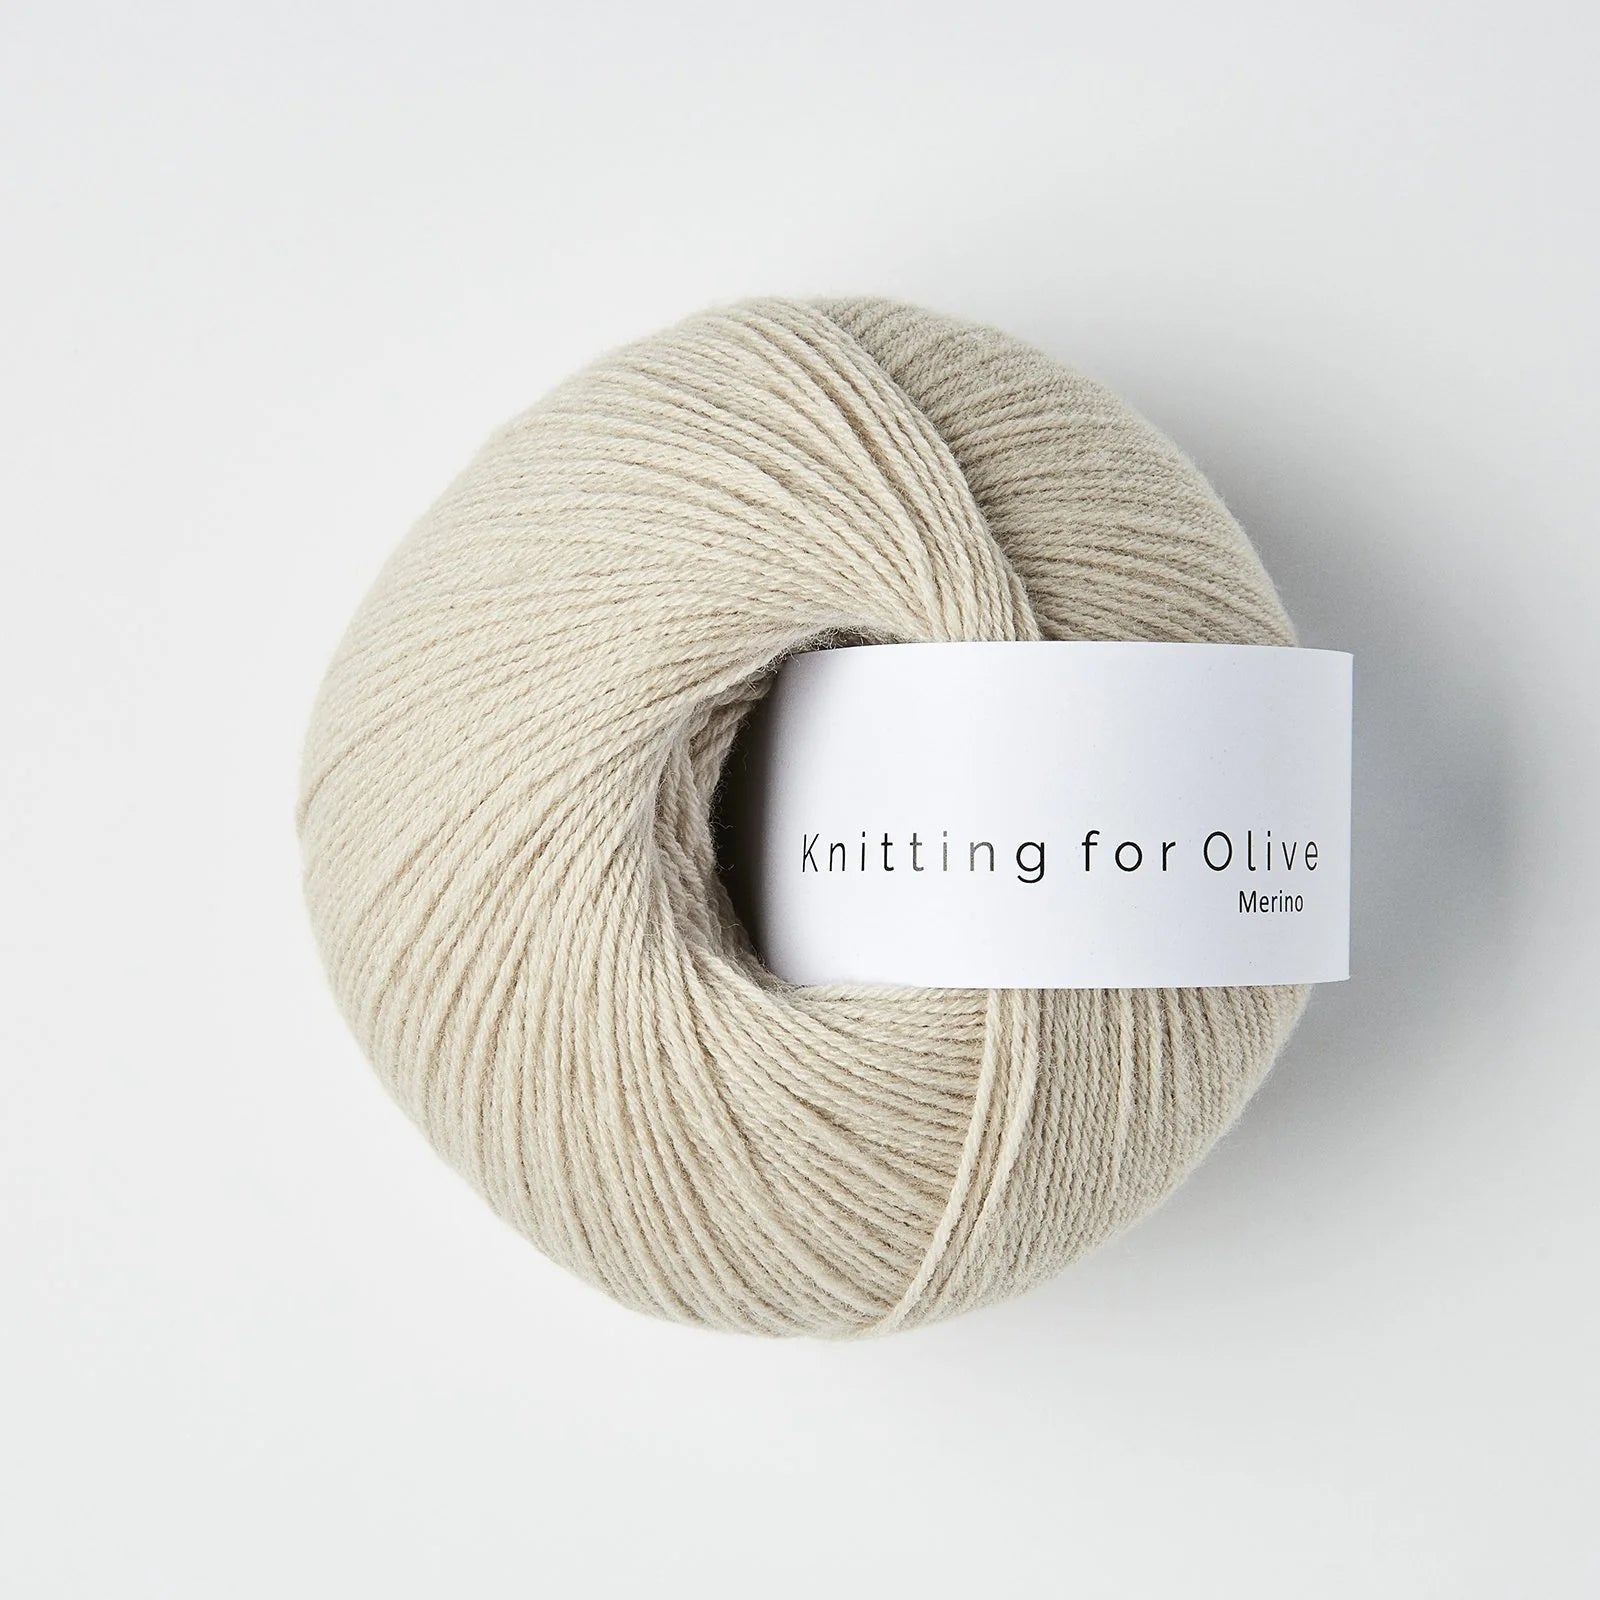 Knitting for Olive Merino - Knitting for Olive - Marzipan - The Little Yarn Store